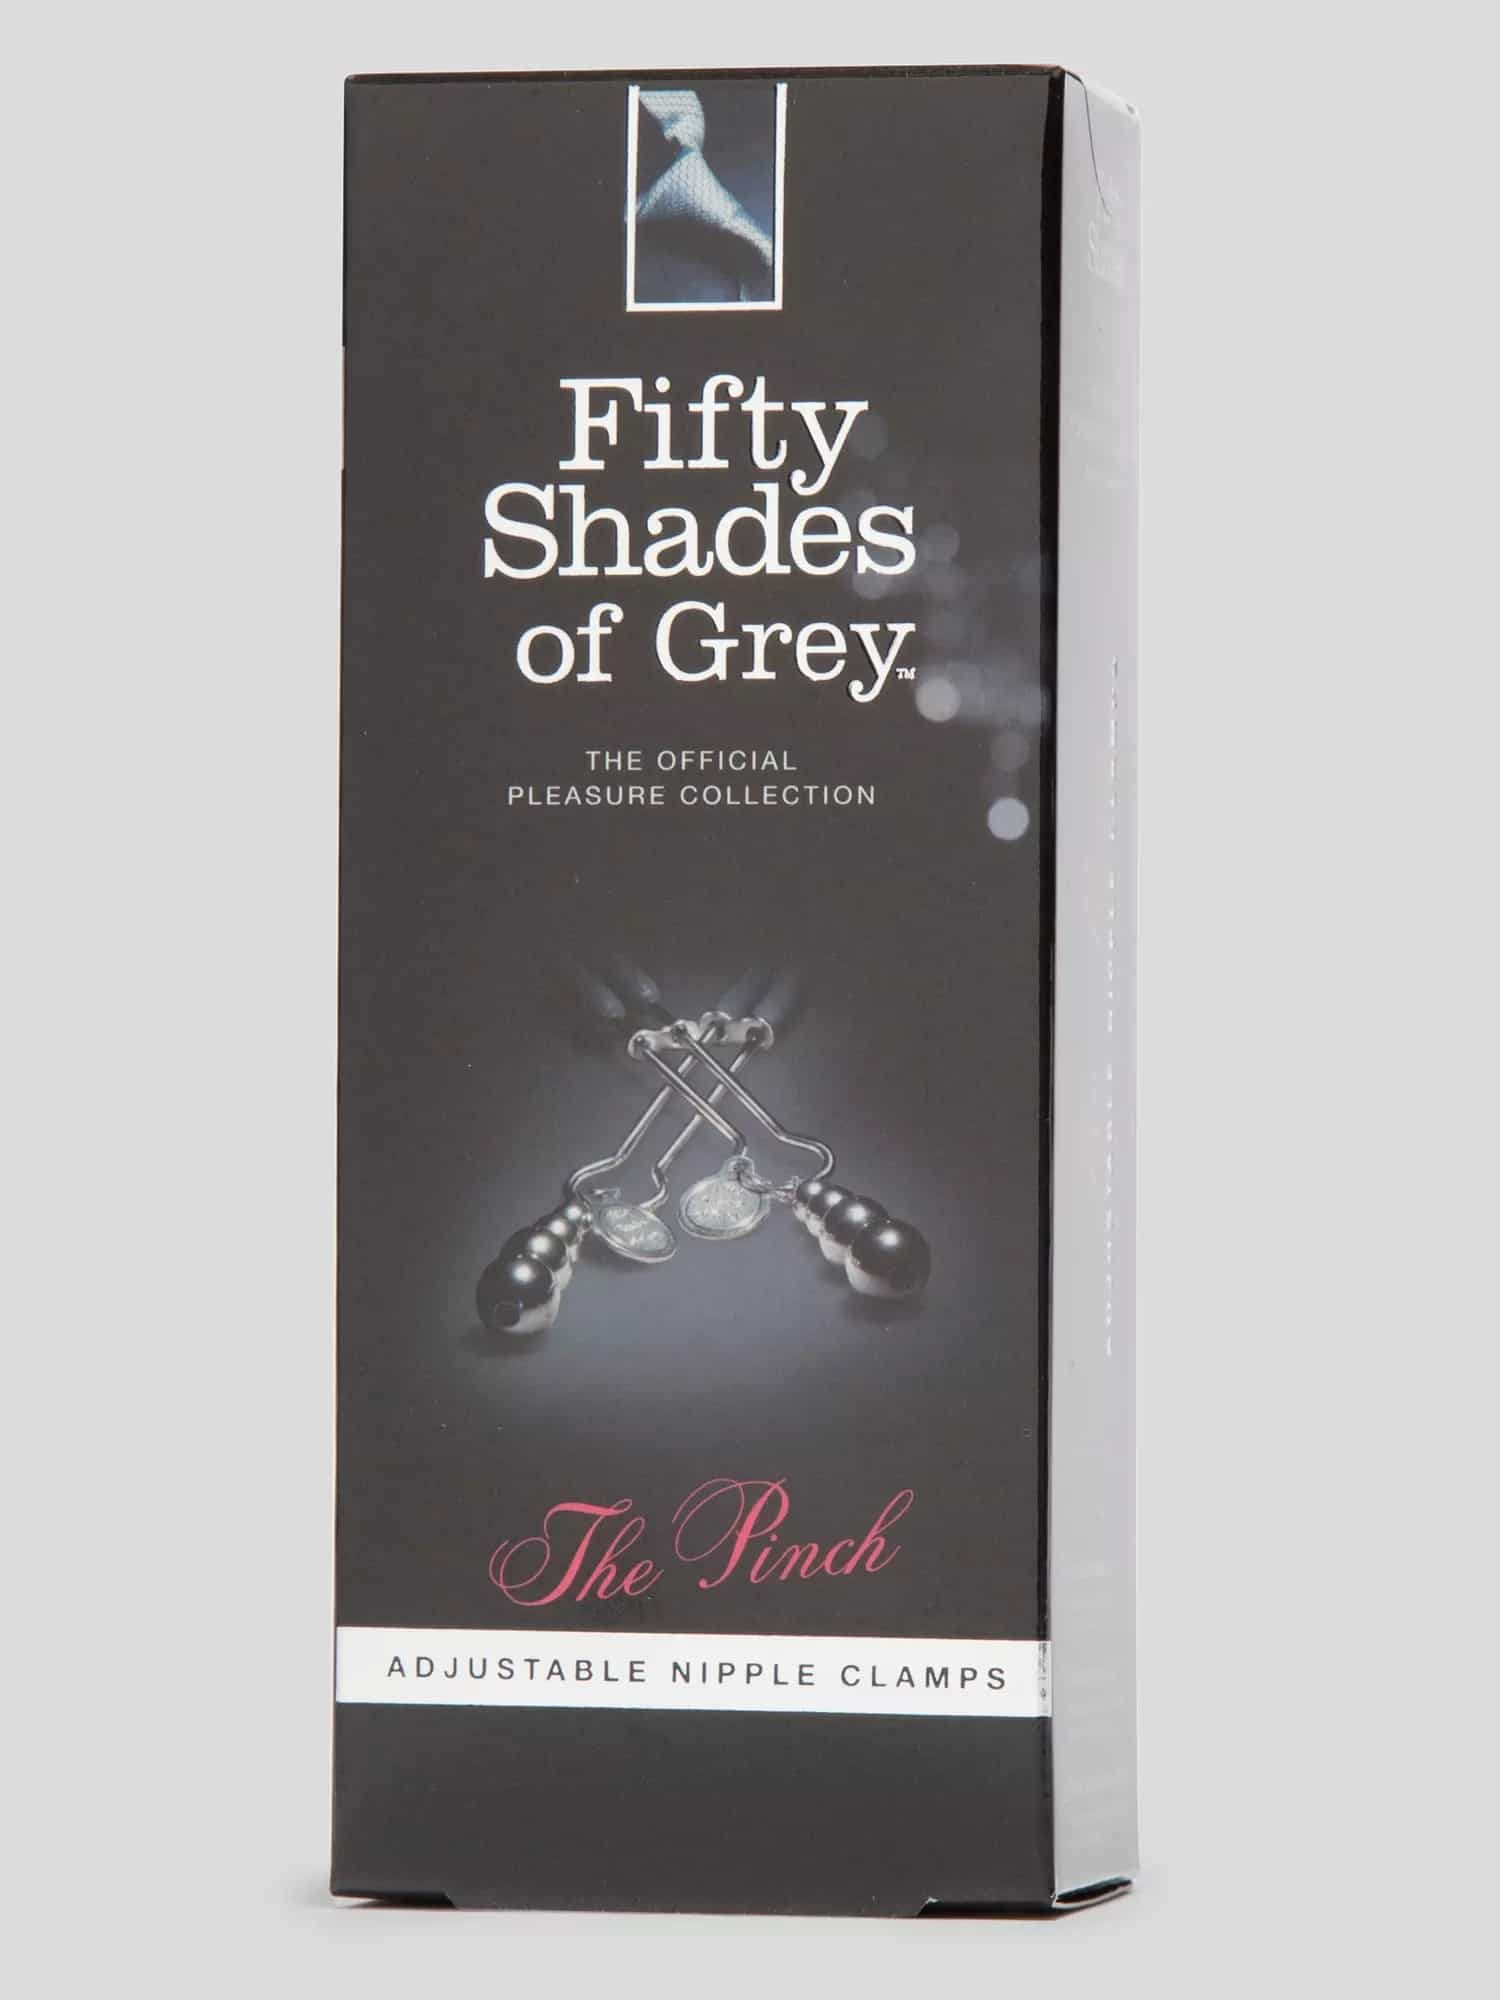 Fifty Shades of Grey The Pinch Adjustable Nipple Clamps. Slide 16